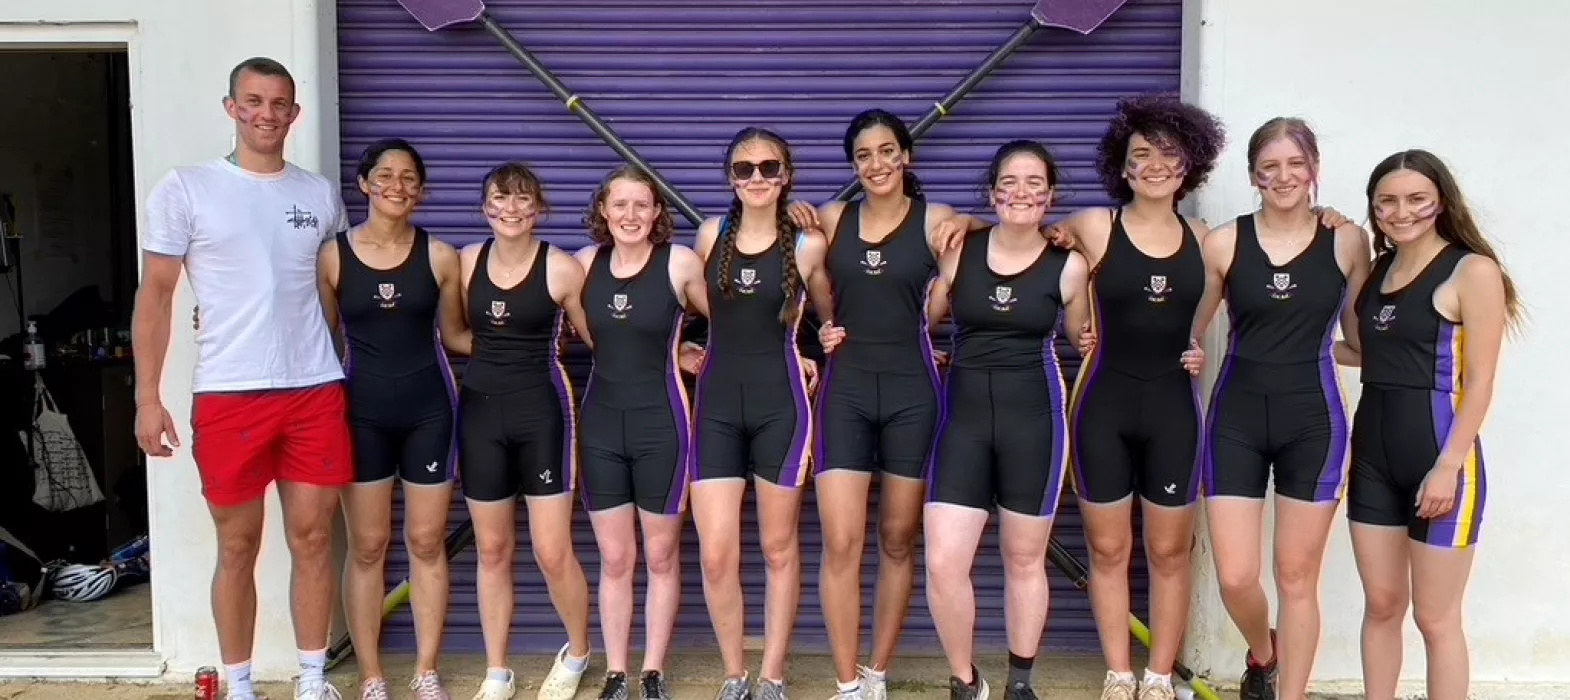 The New College Boat Club